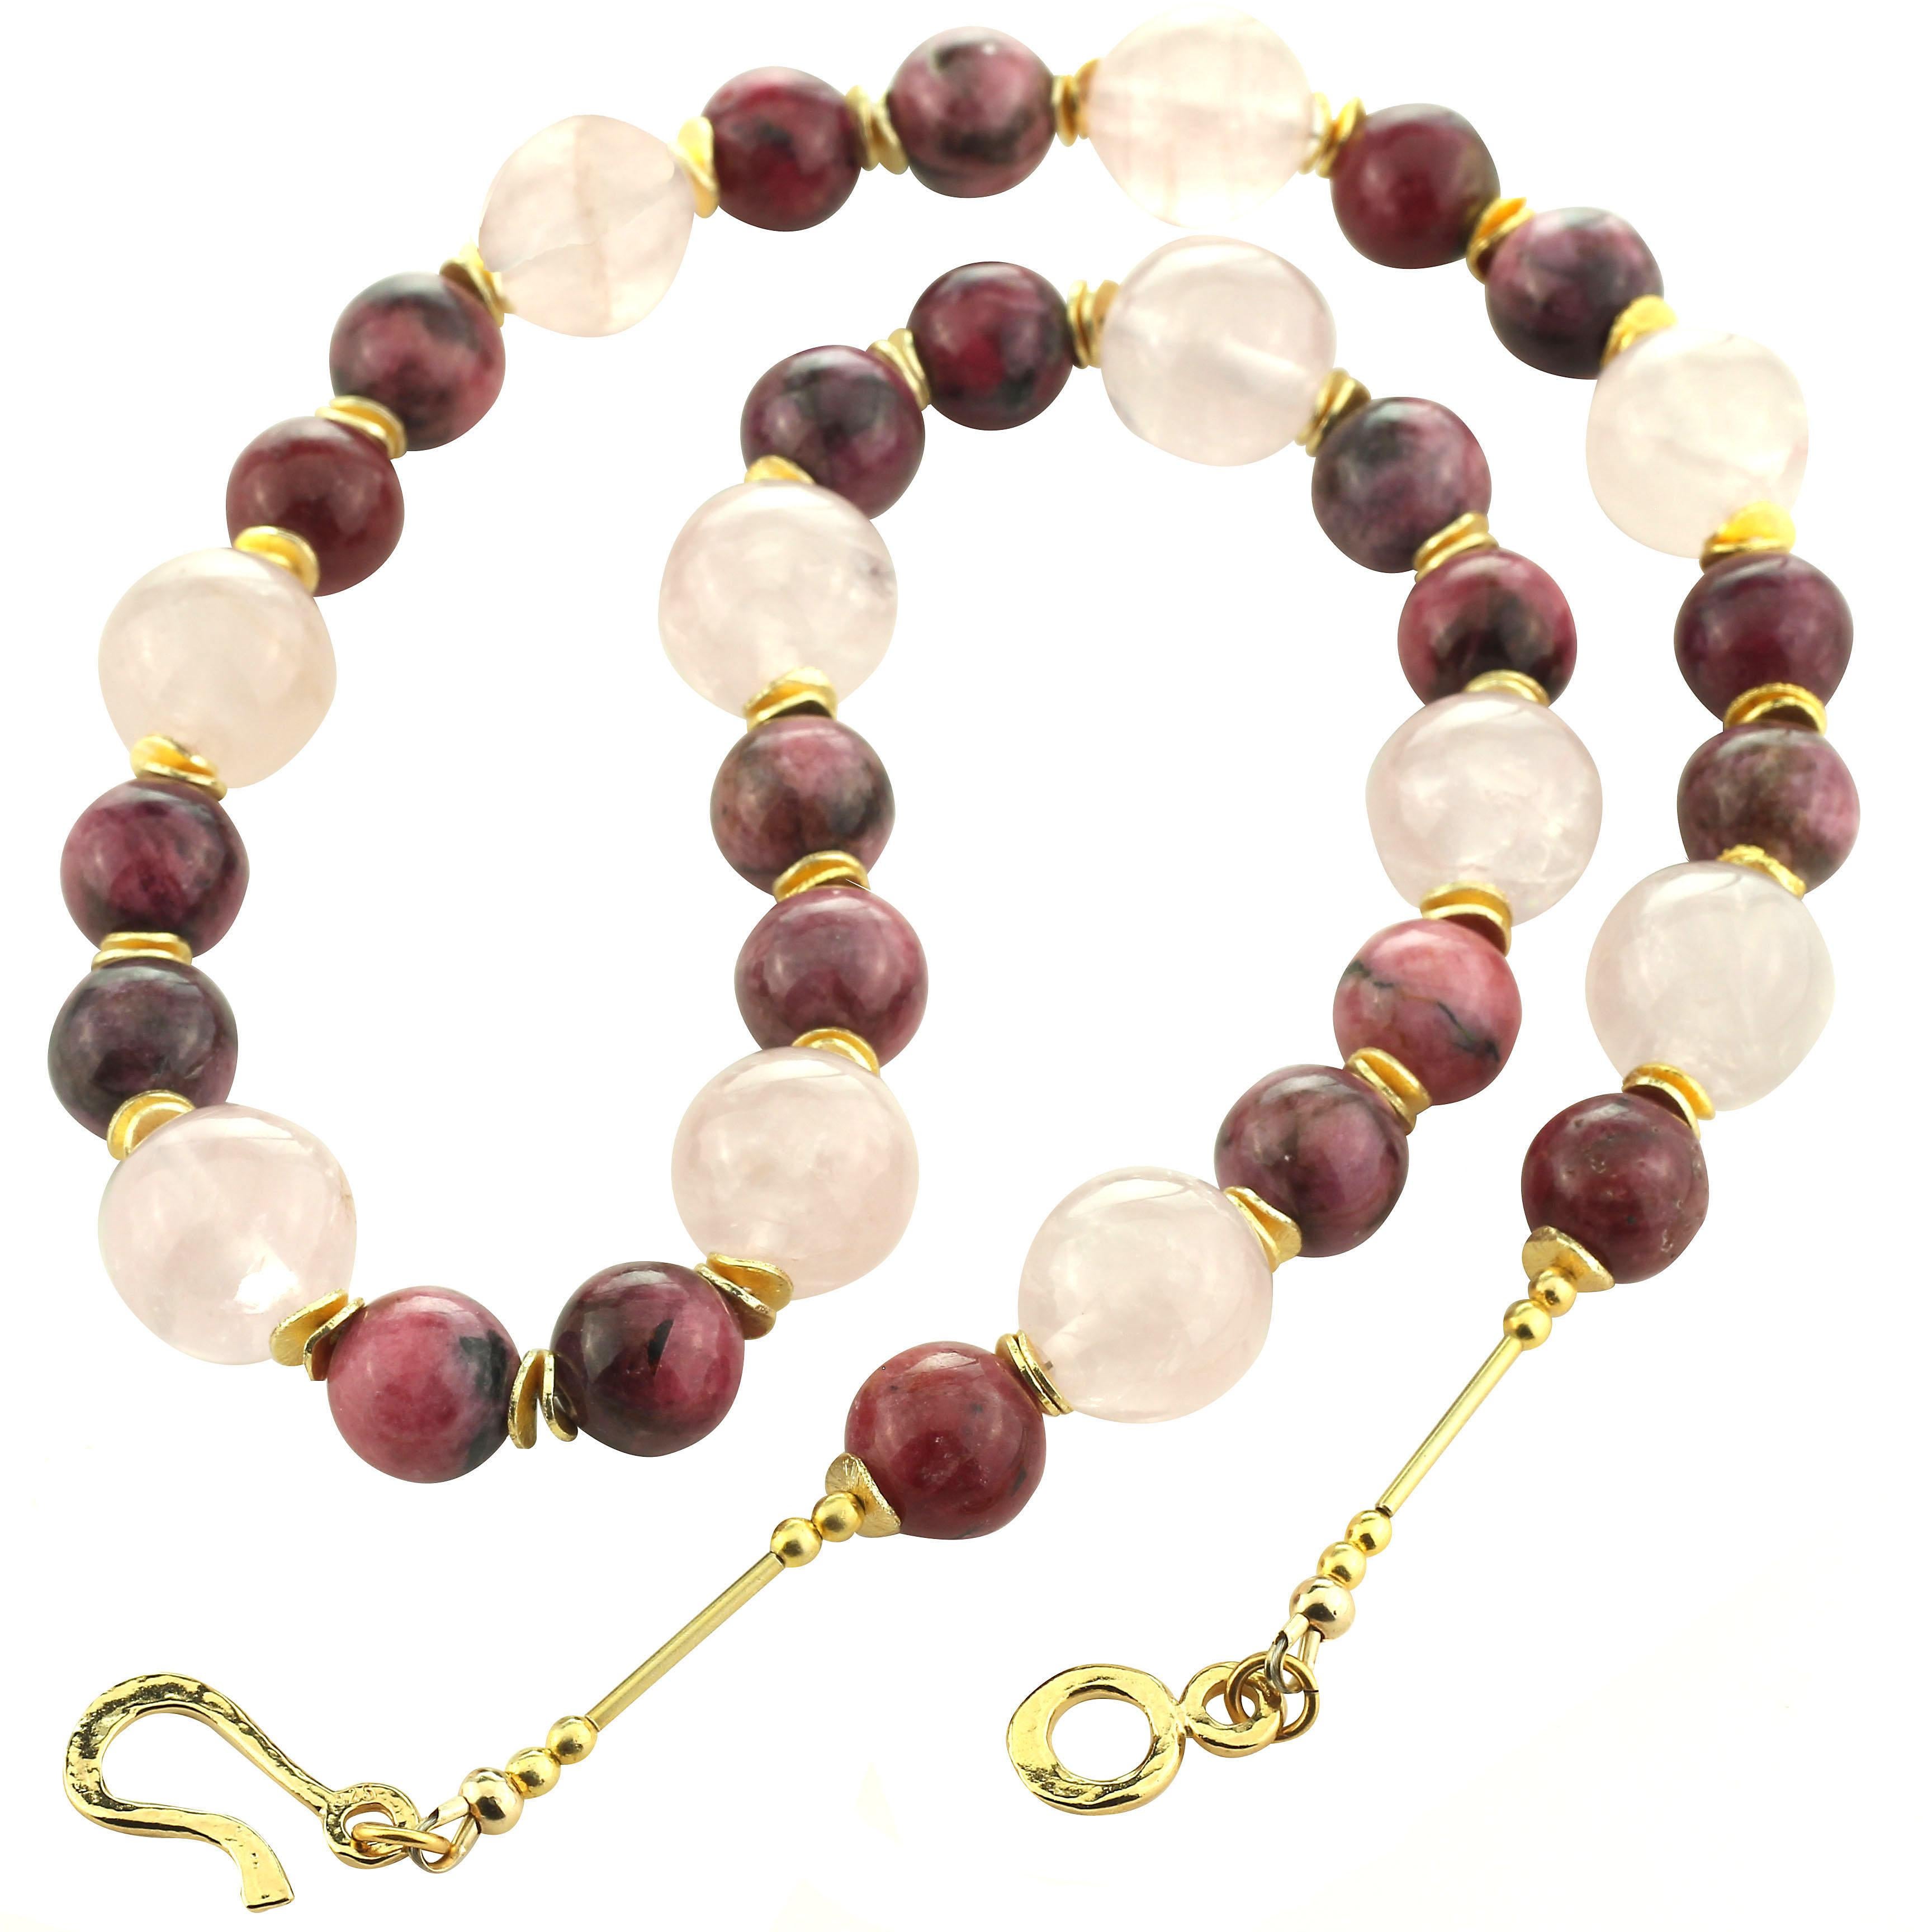 AJD 24 Inch Necklace of Polished Rhodonite and Rose Quartz  Great Gift!! 1